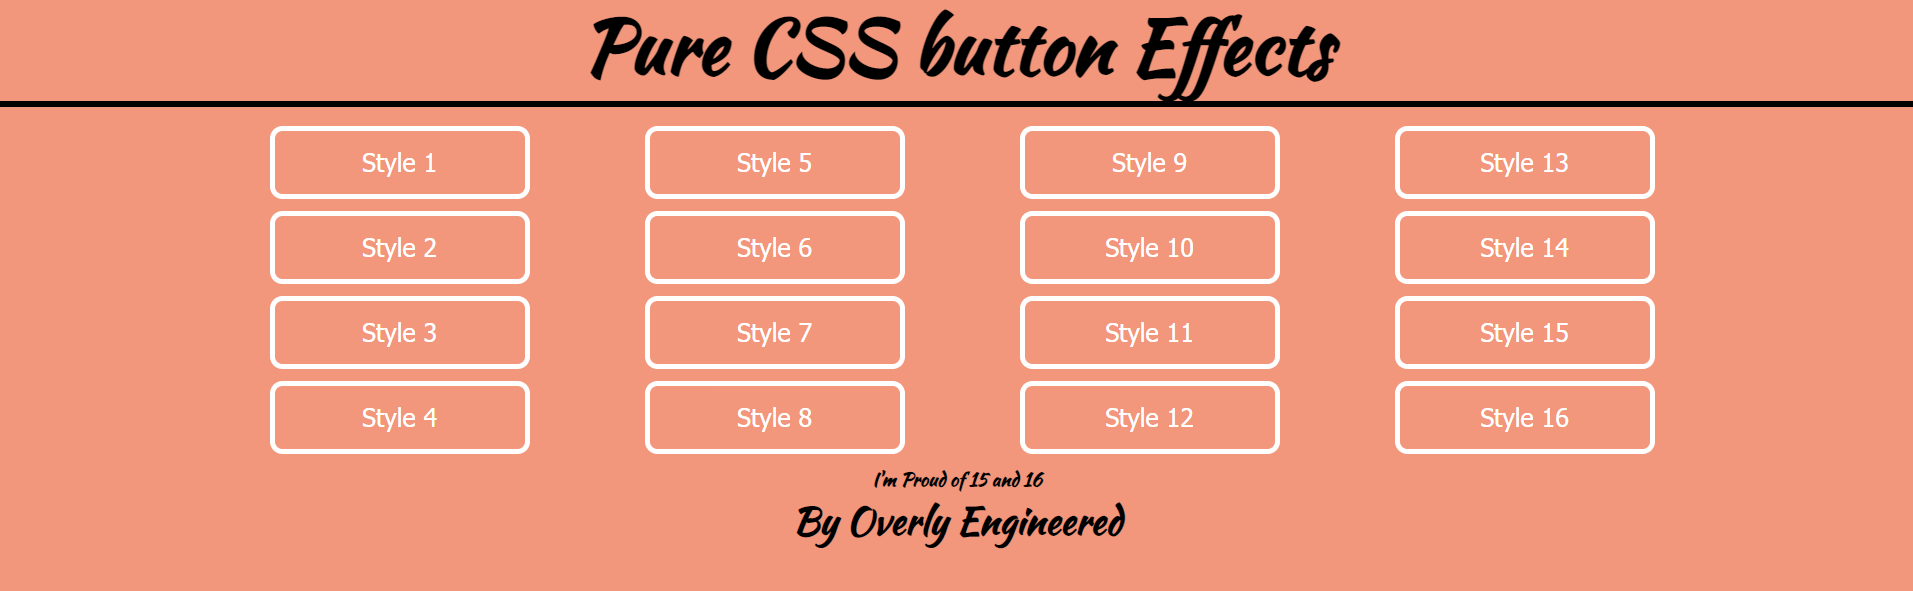 Pure CSS Button Effects